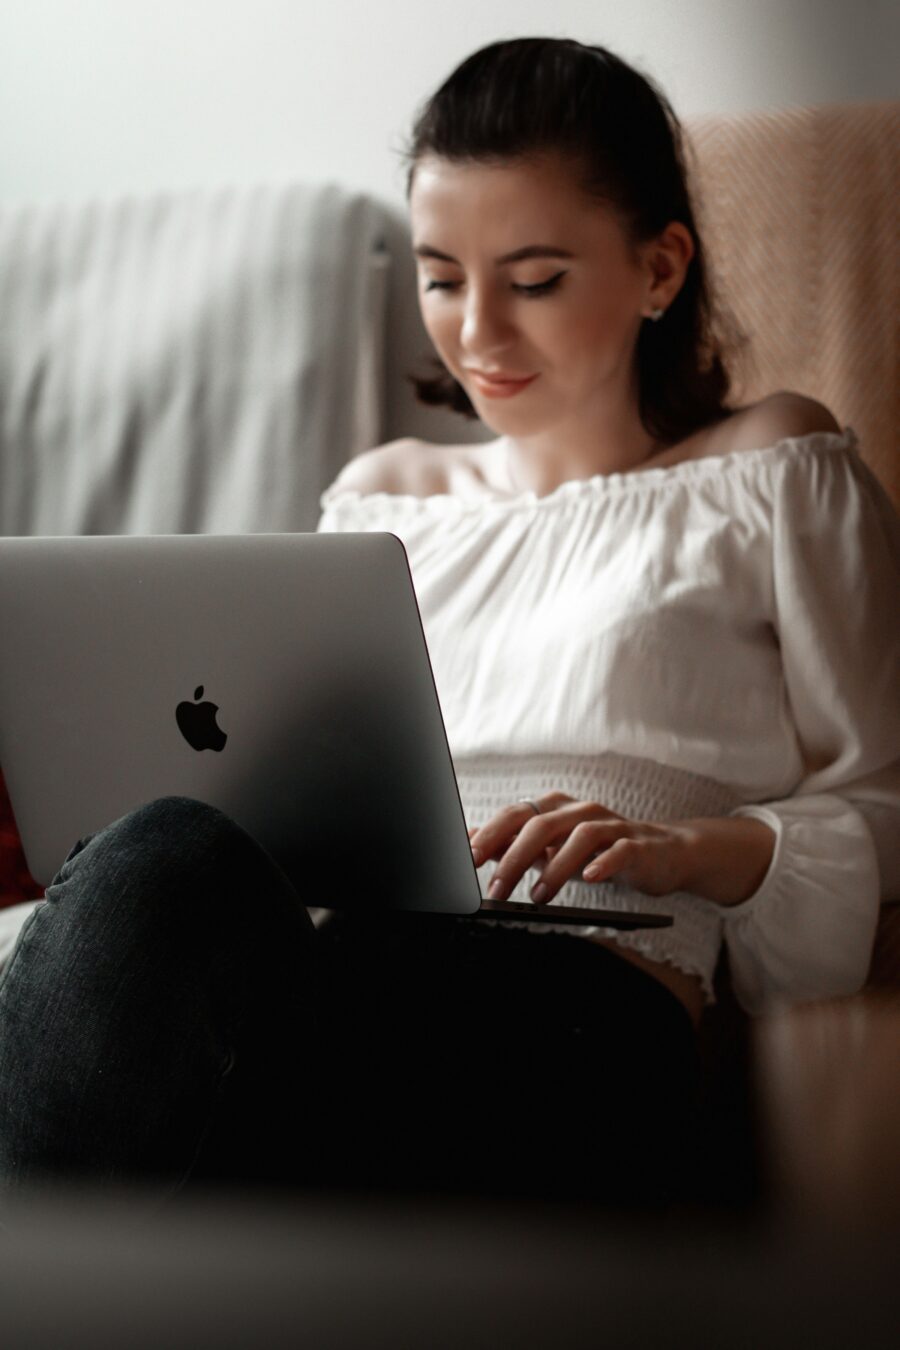 A young woman in a white shirt uses a laptop that sits in her lap.